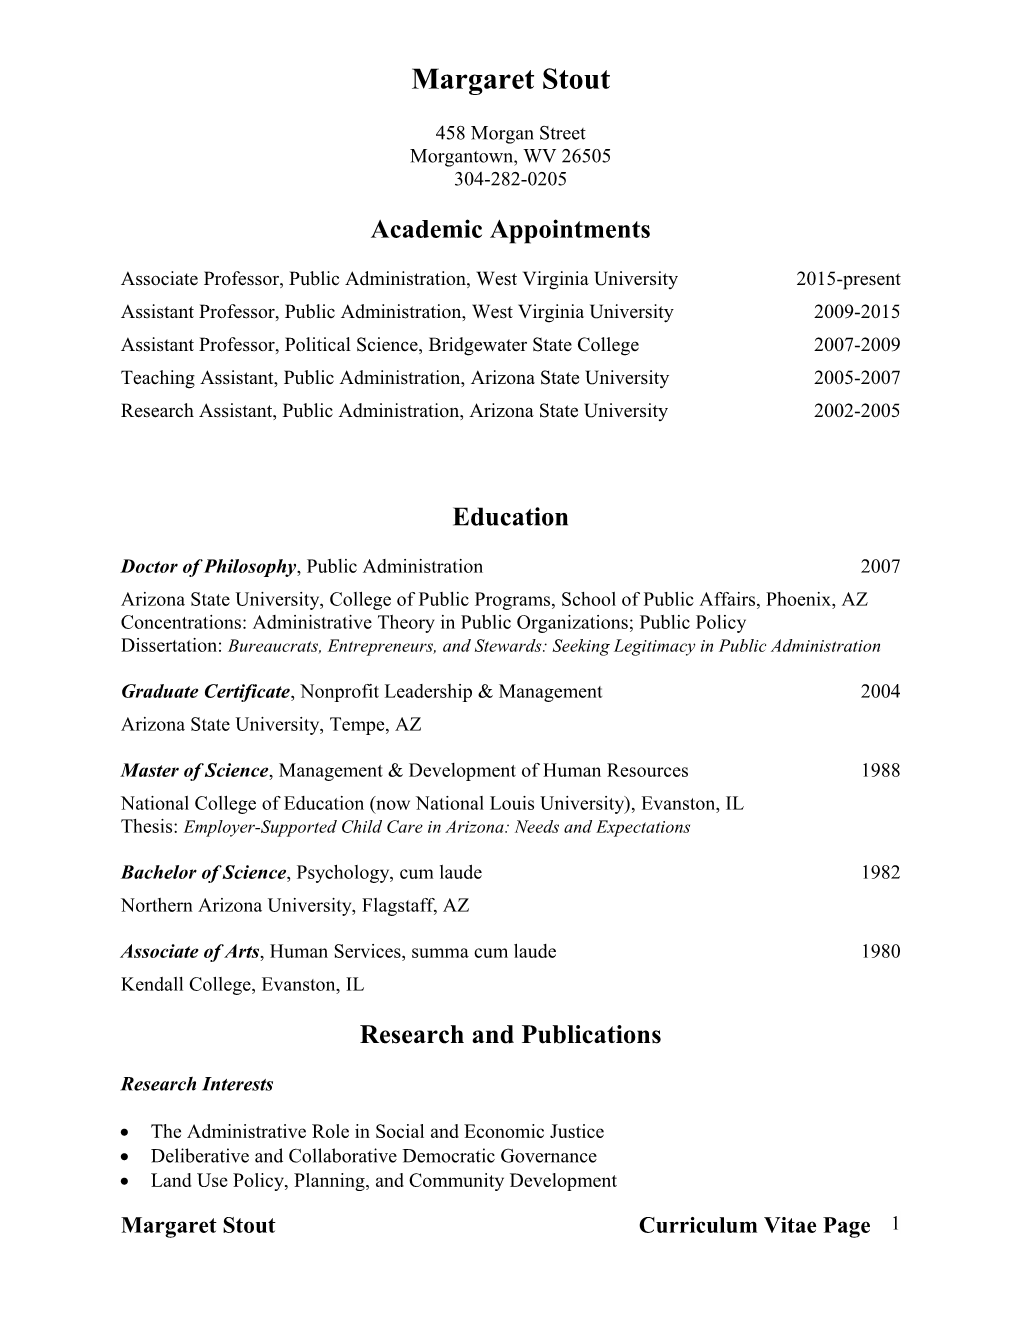 Academic Appointments